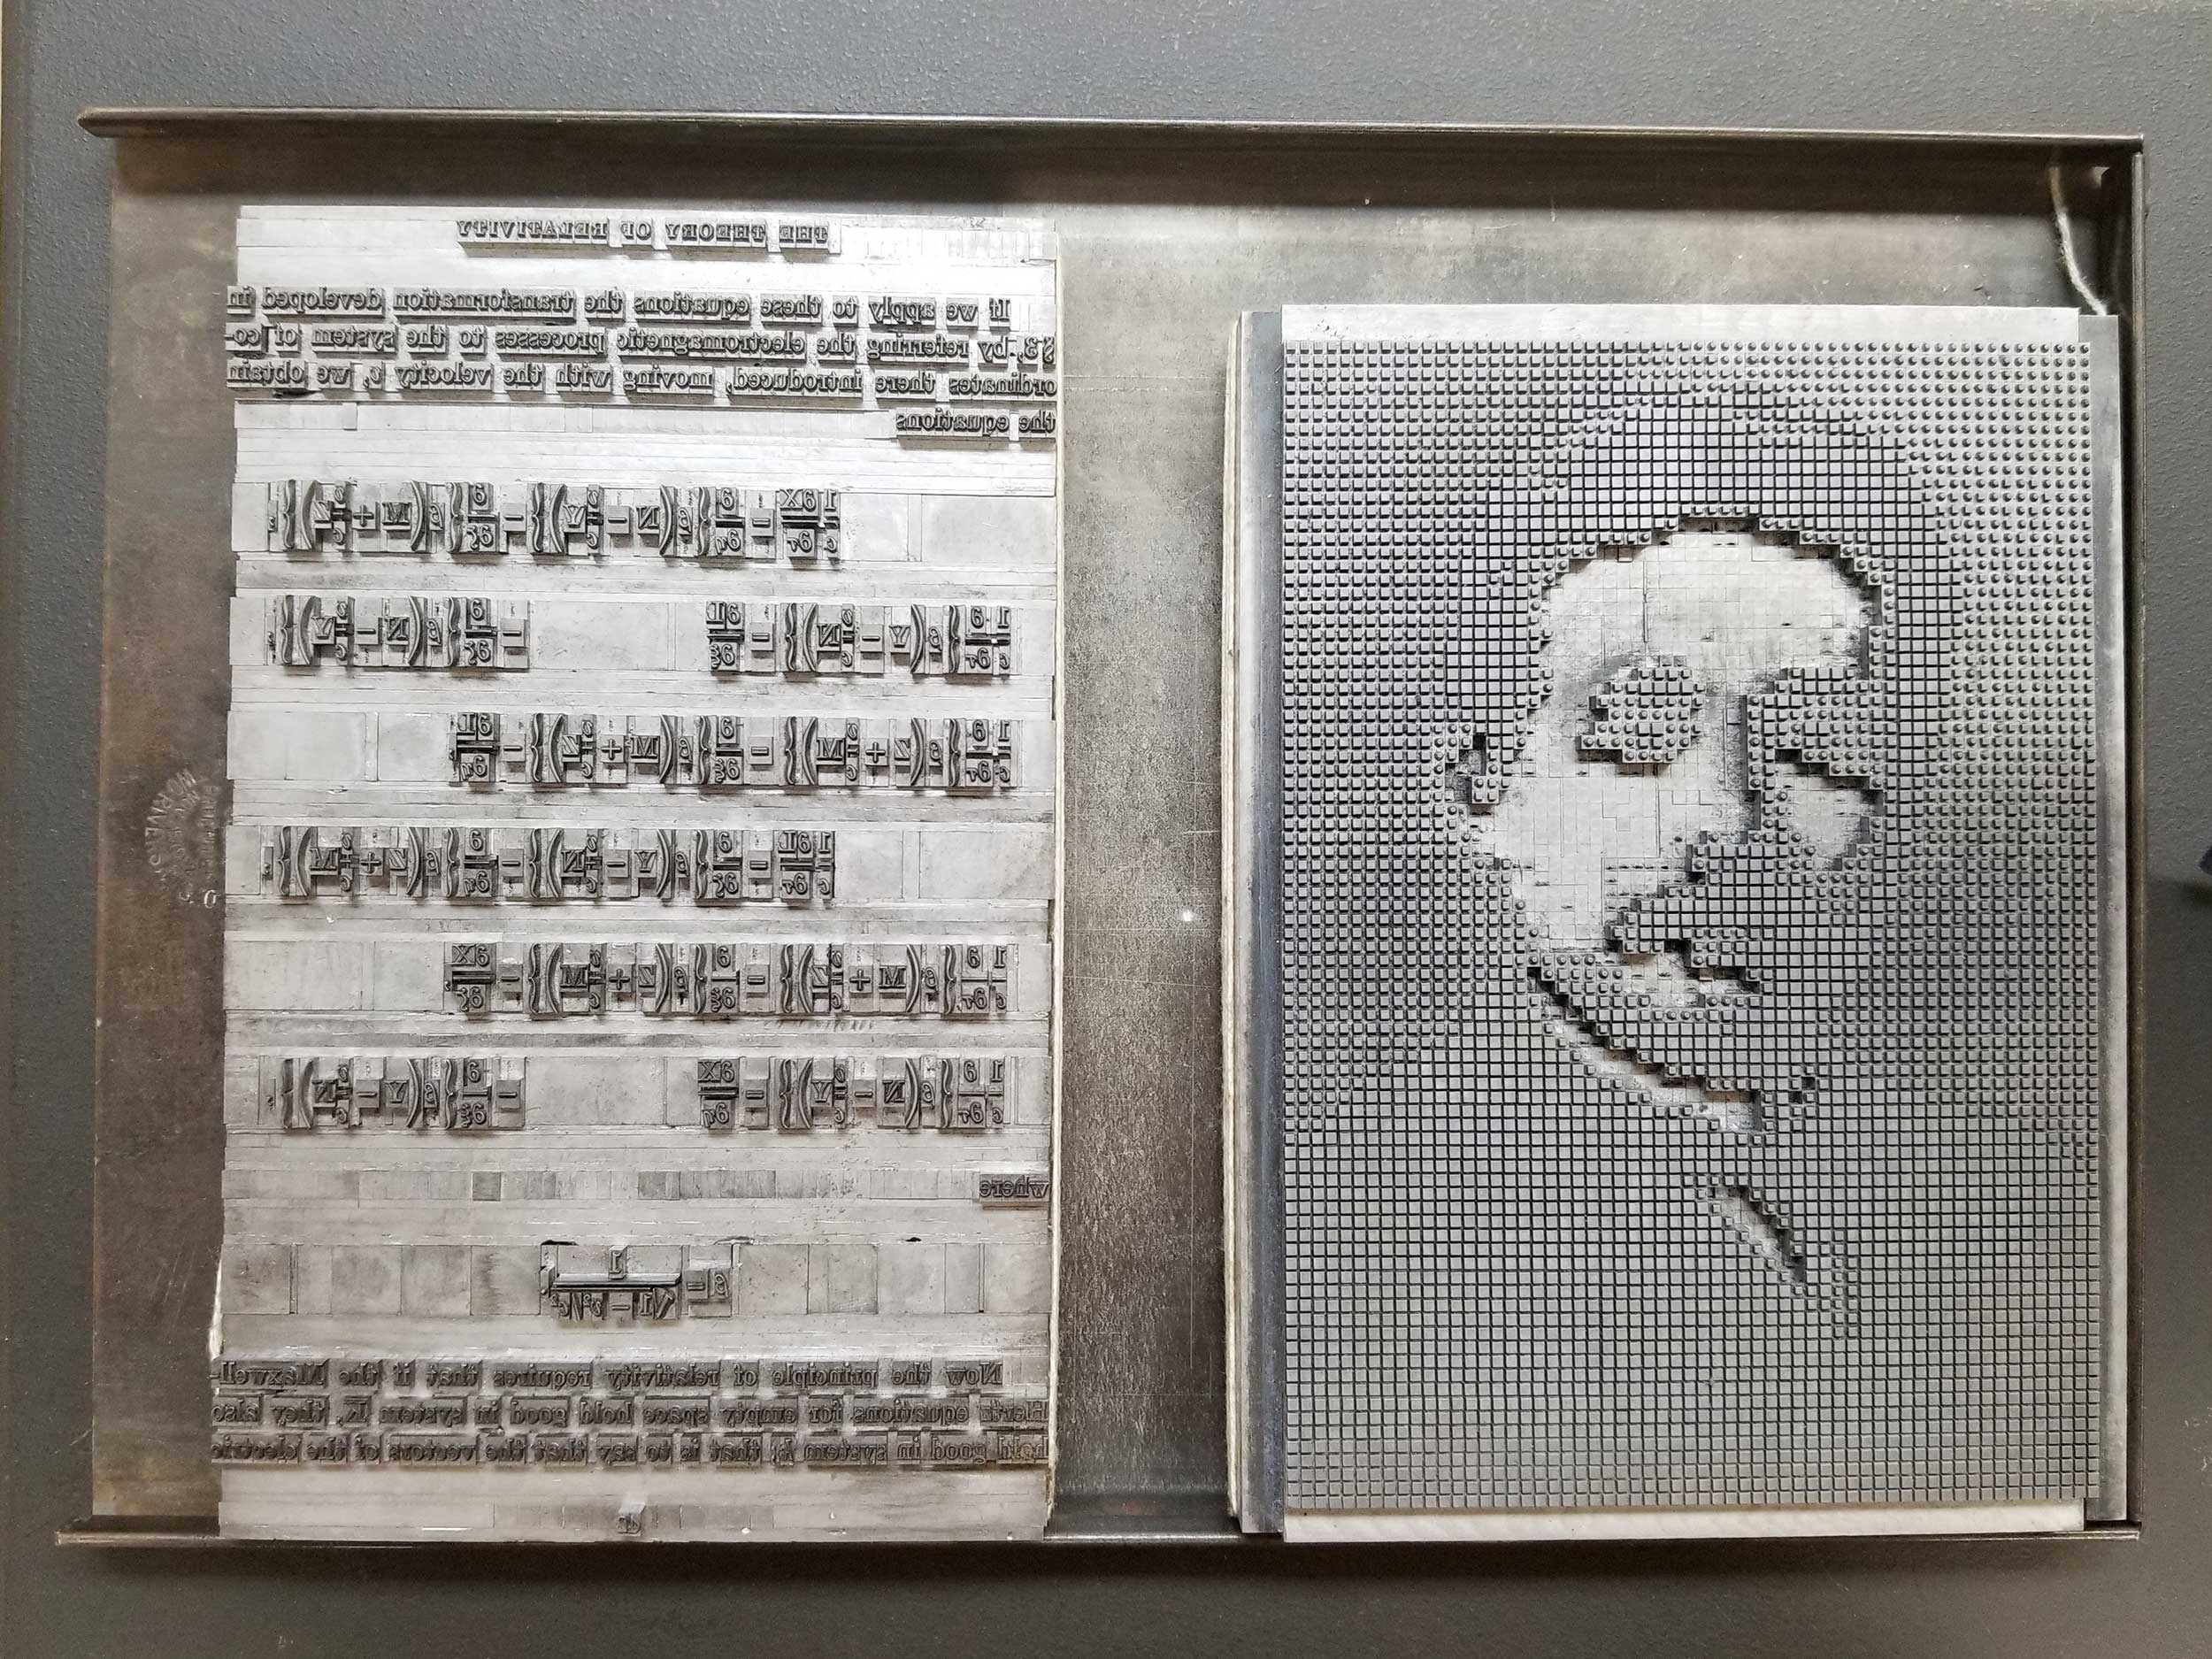  A portrait of Einstein designed by printer Blake Riley for the Arion edition of  The Theory of Relativity  